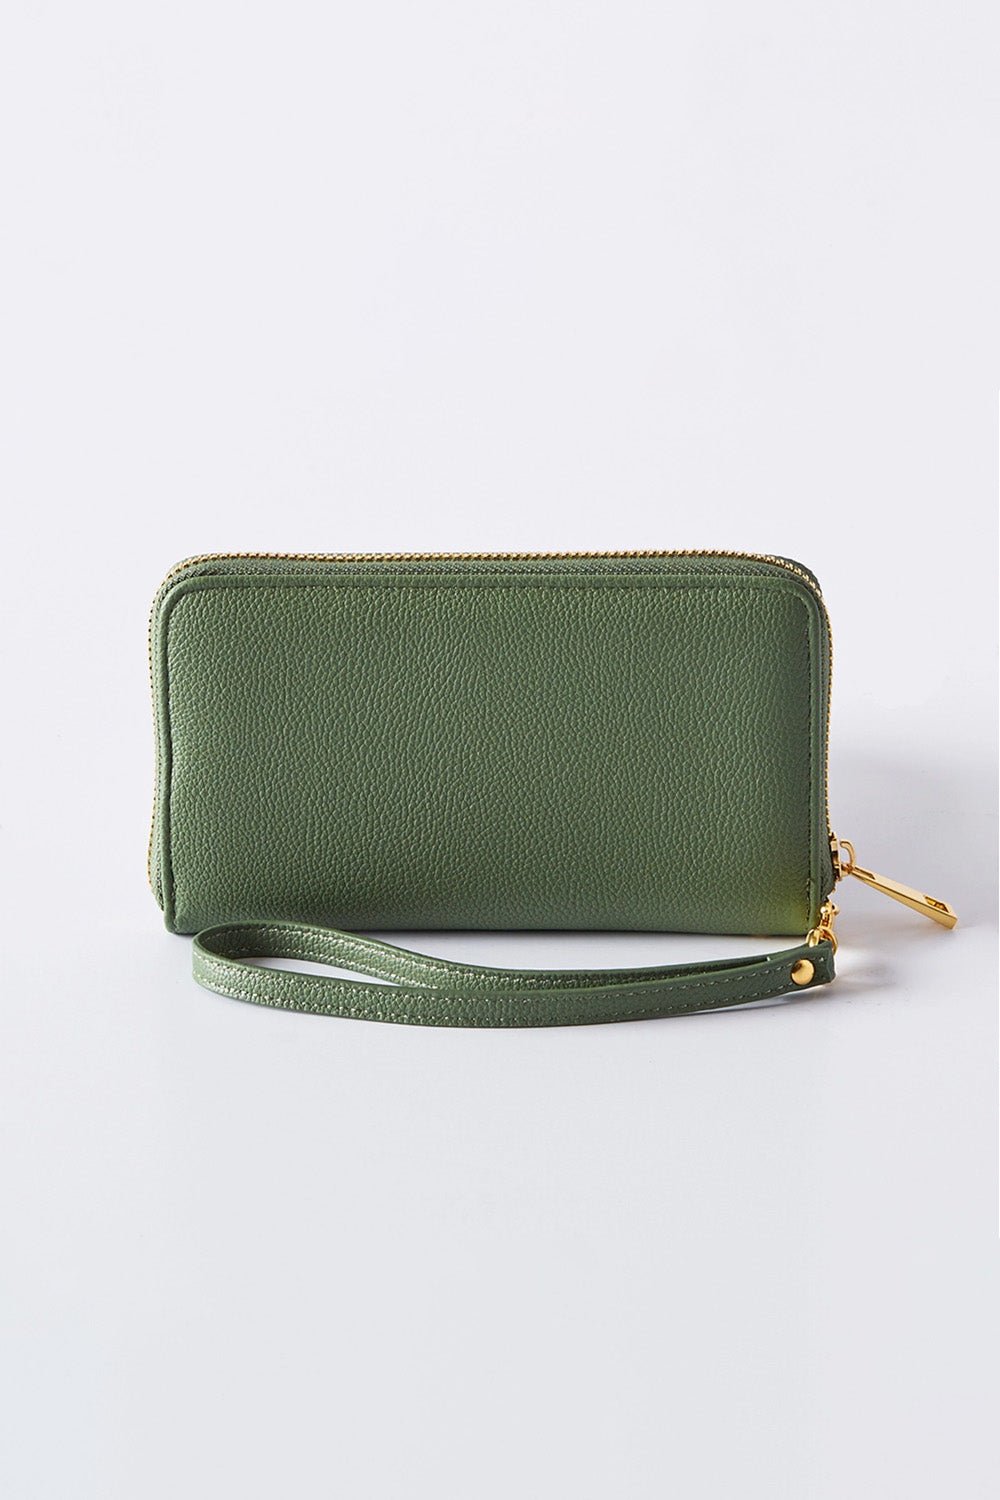 Vegan Leather Wristlet Wallet - Purses and Bags - The Green Brick Boutique